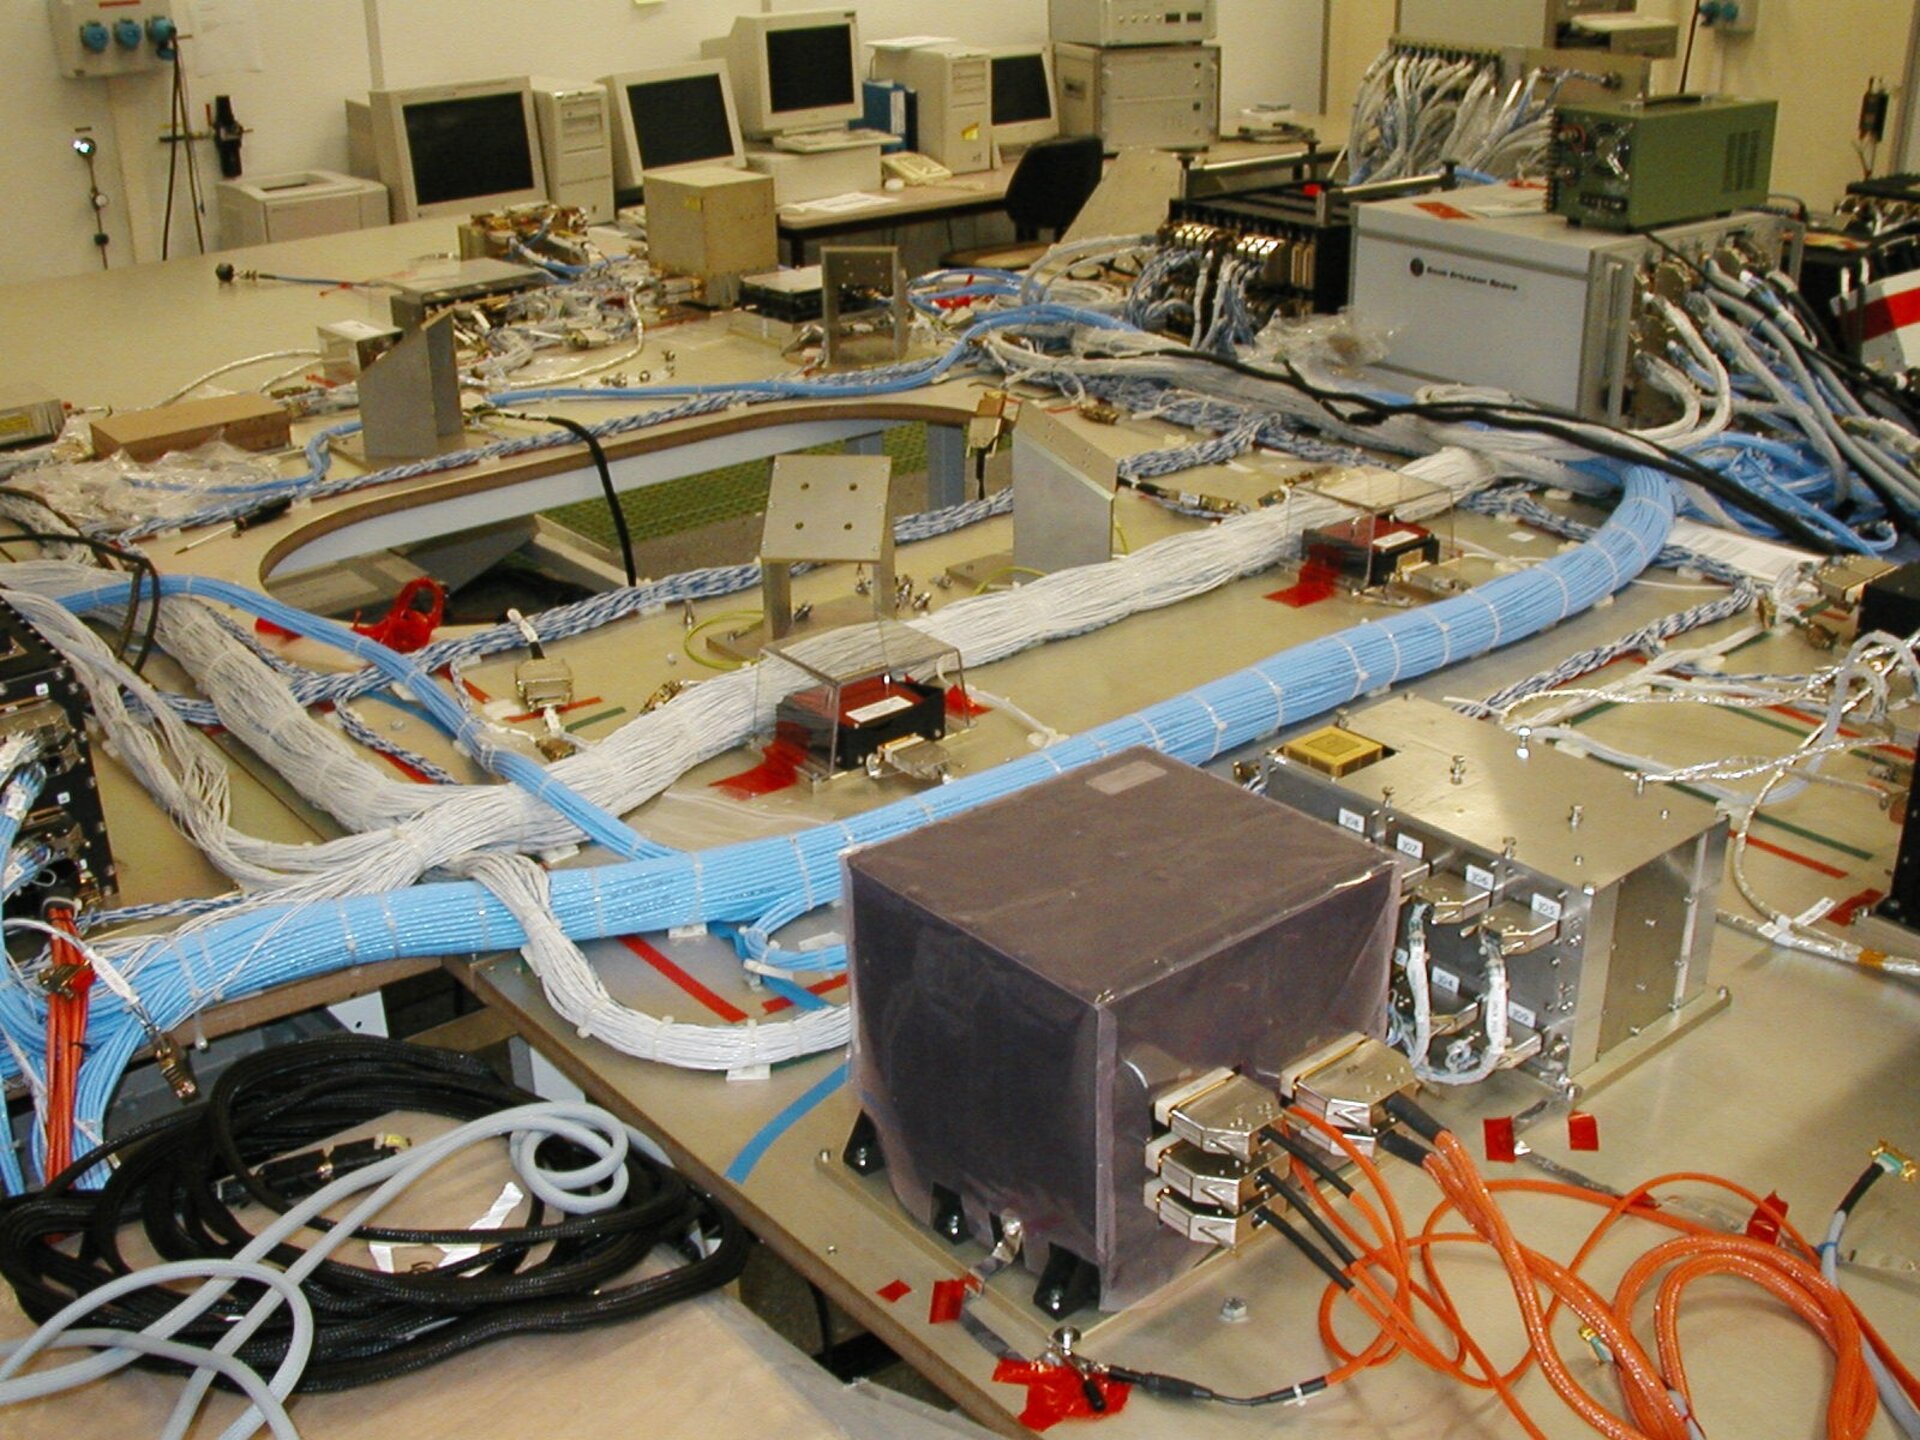 Mars Express Avionics Test Bench highlighting the inter-unit electrical harnesses.